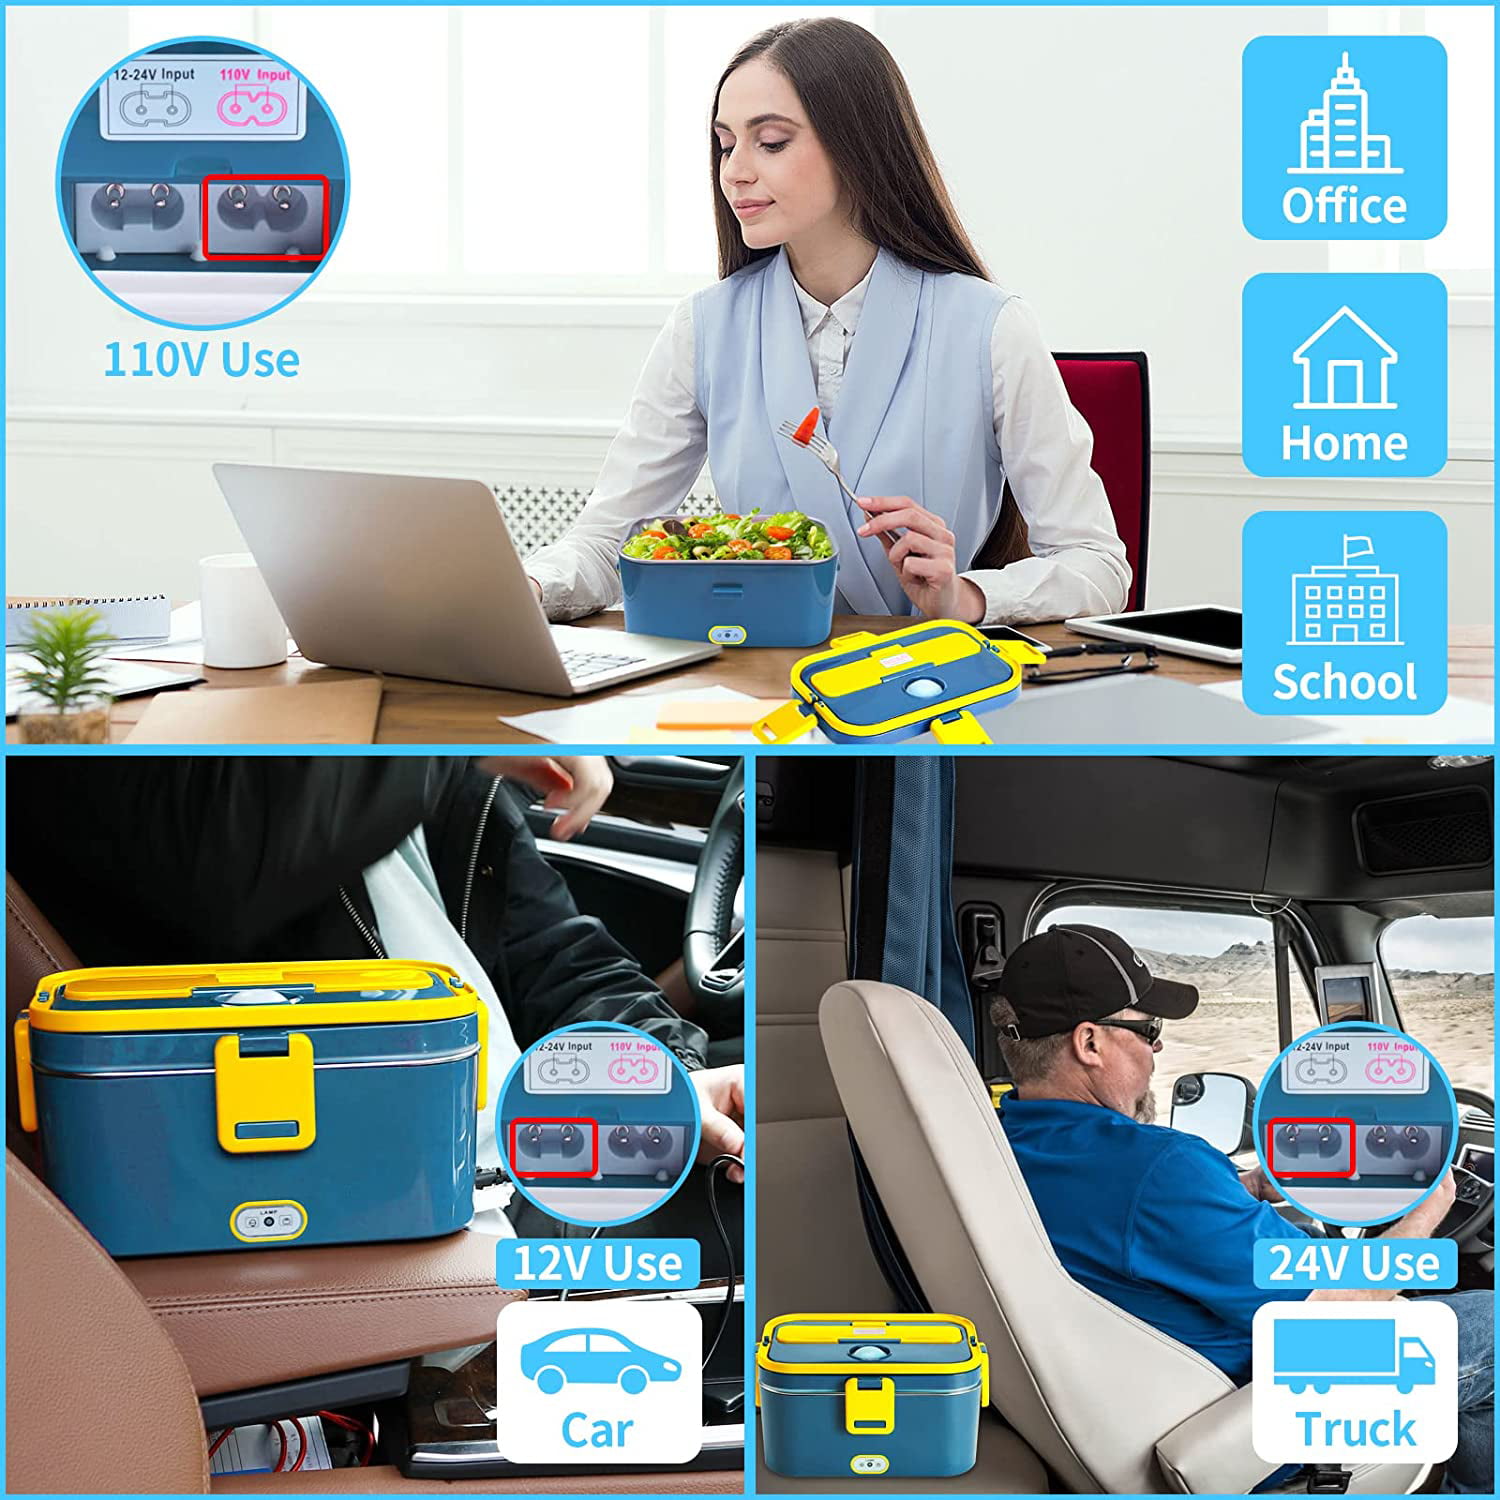 COROTC Electric Lunch Box, 3 IN 1 12V/24V/110V Heated Lunch Boxes for Work  Car/Truck, Portable Micro…See more COROTC Electric Lunch Box, 3 IN 1